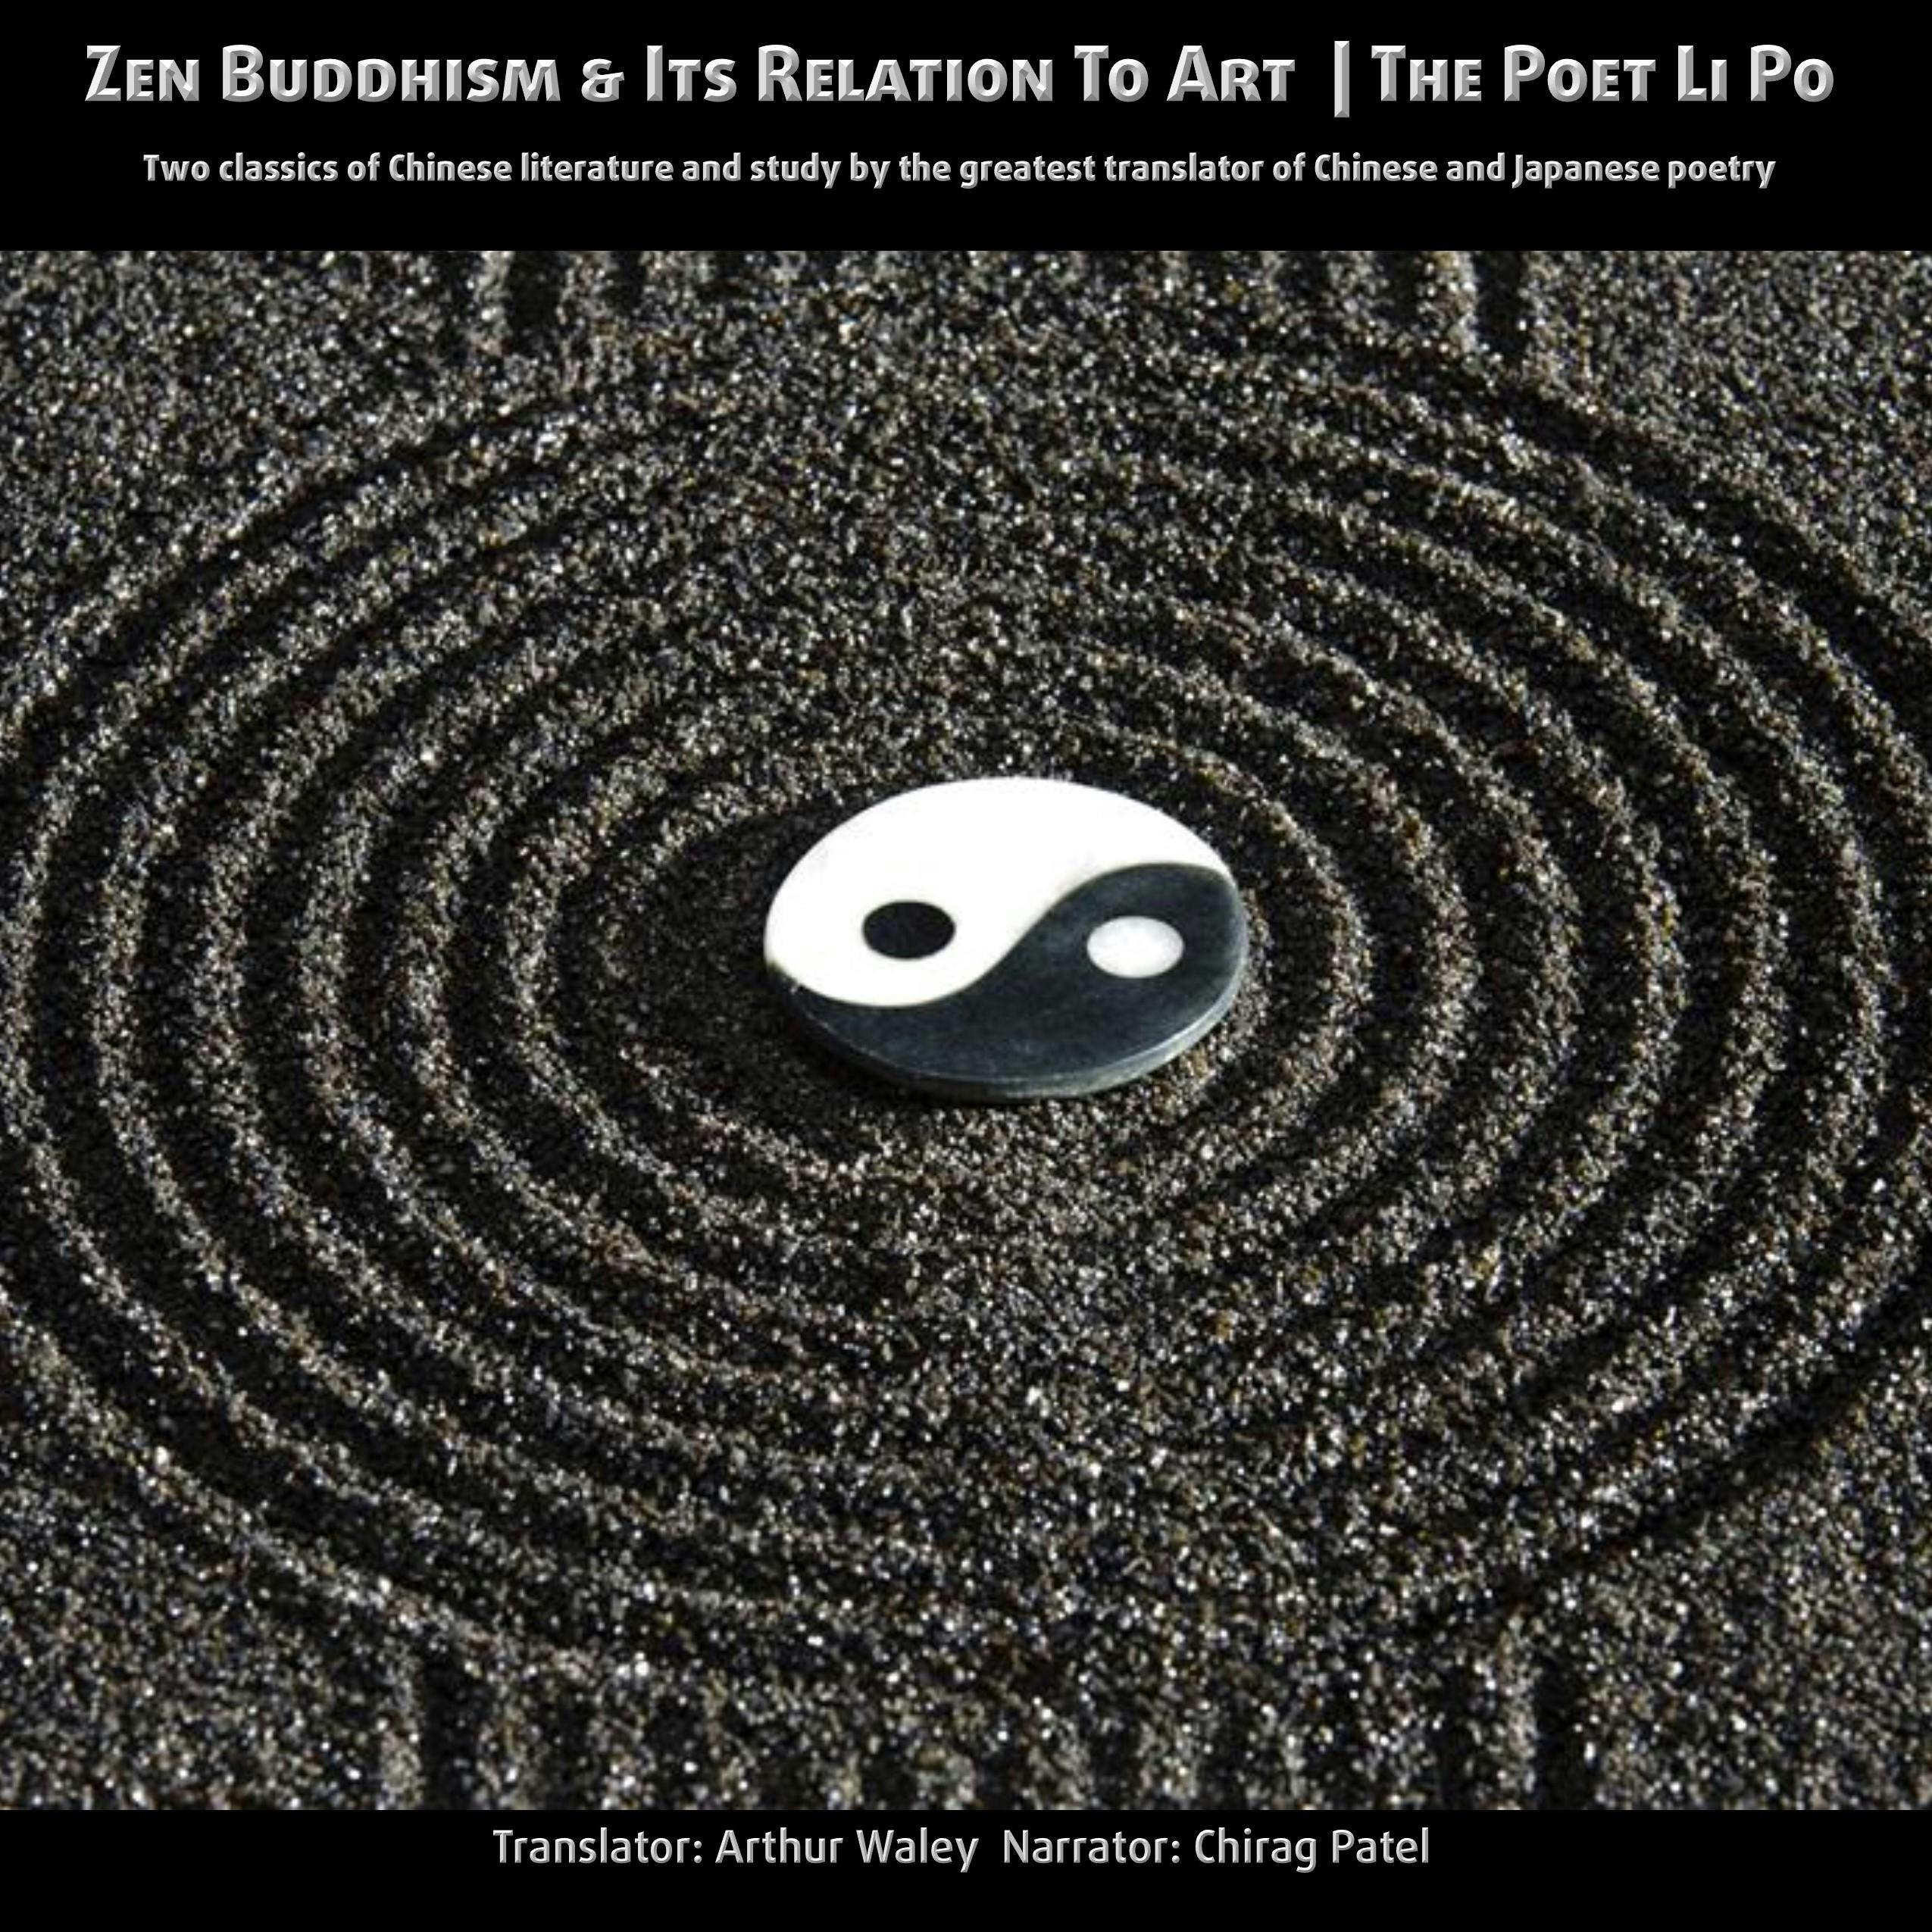 Zen Buddhism and Its relation to Art | The Poet Li Po: Two classics of Chinese literature and study by the greatest translator of Chinese poetry - Arthur Waley